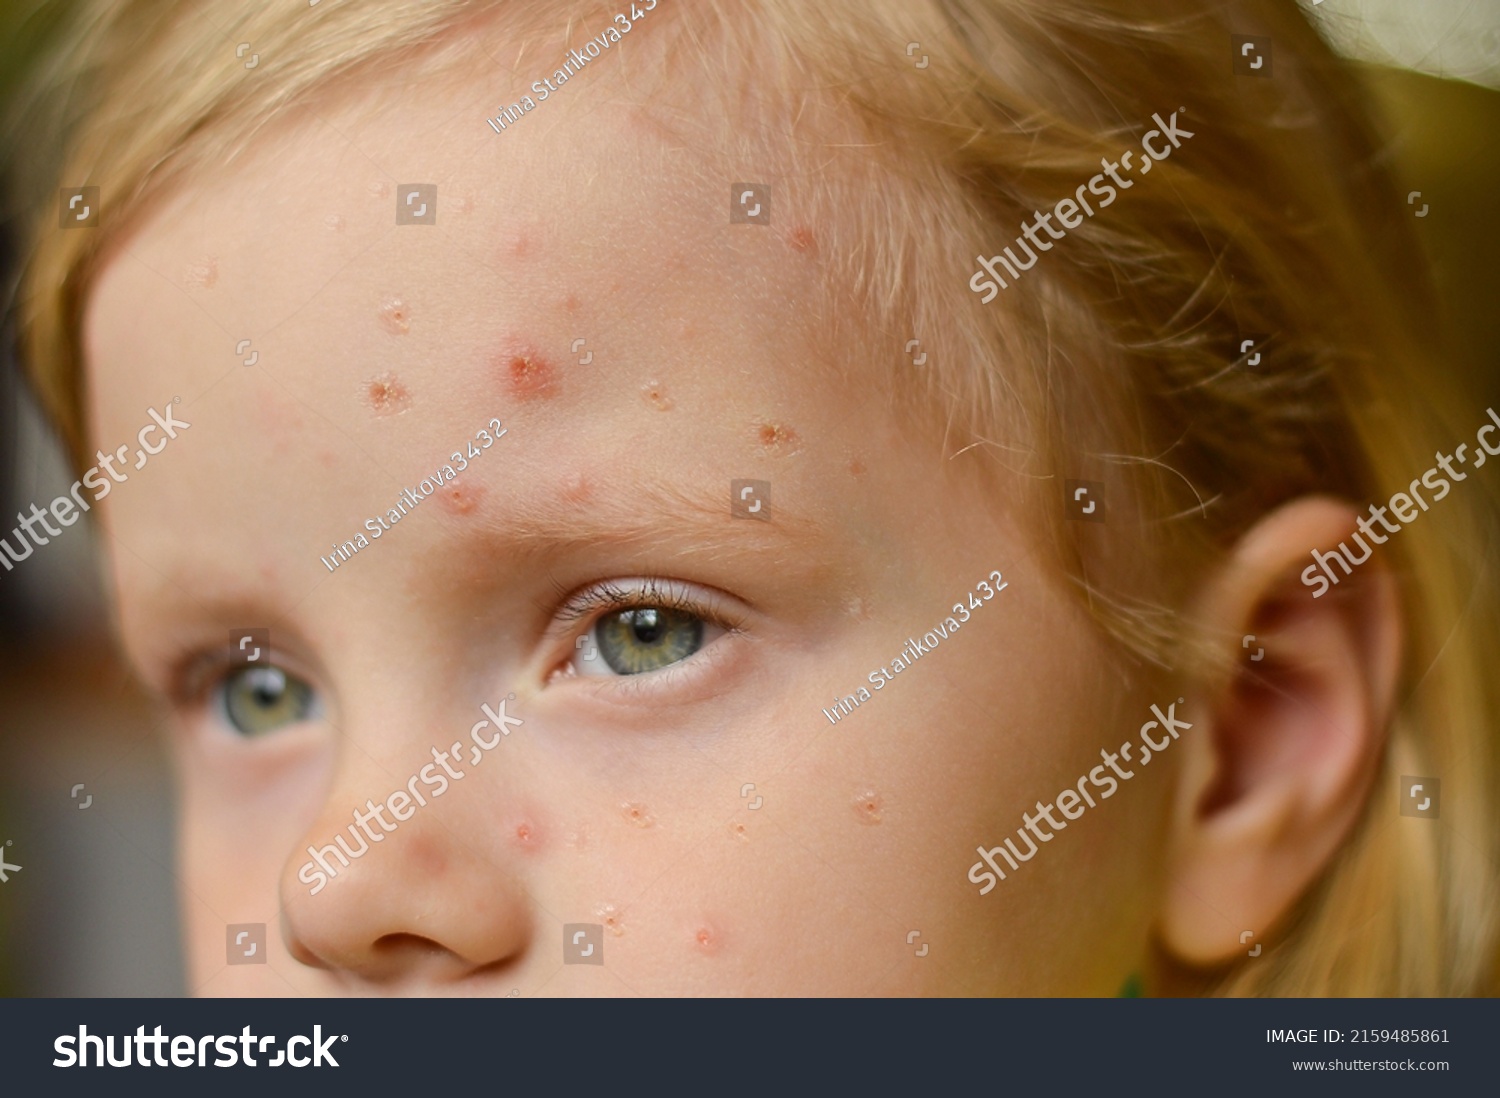 Monkeypox new disease dangerous over the world. Selective focus. Close-up of a Caucasian girl with pimples and ulcers on her face. #2159485861